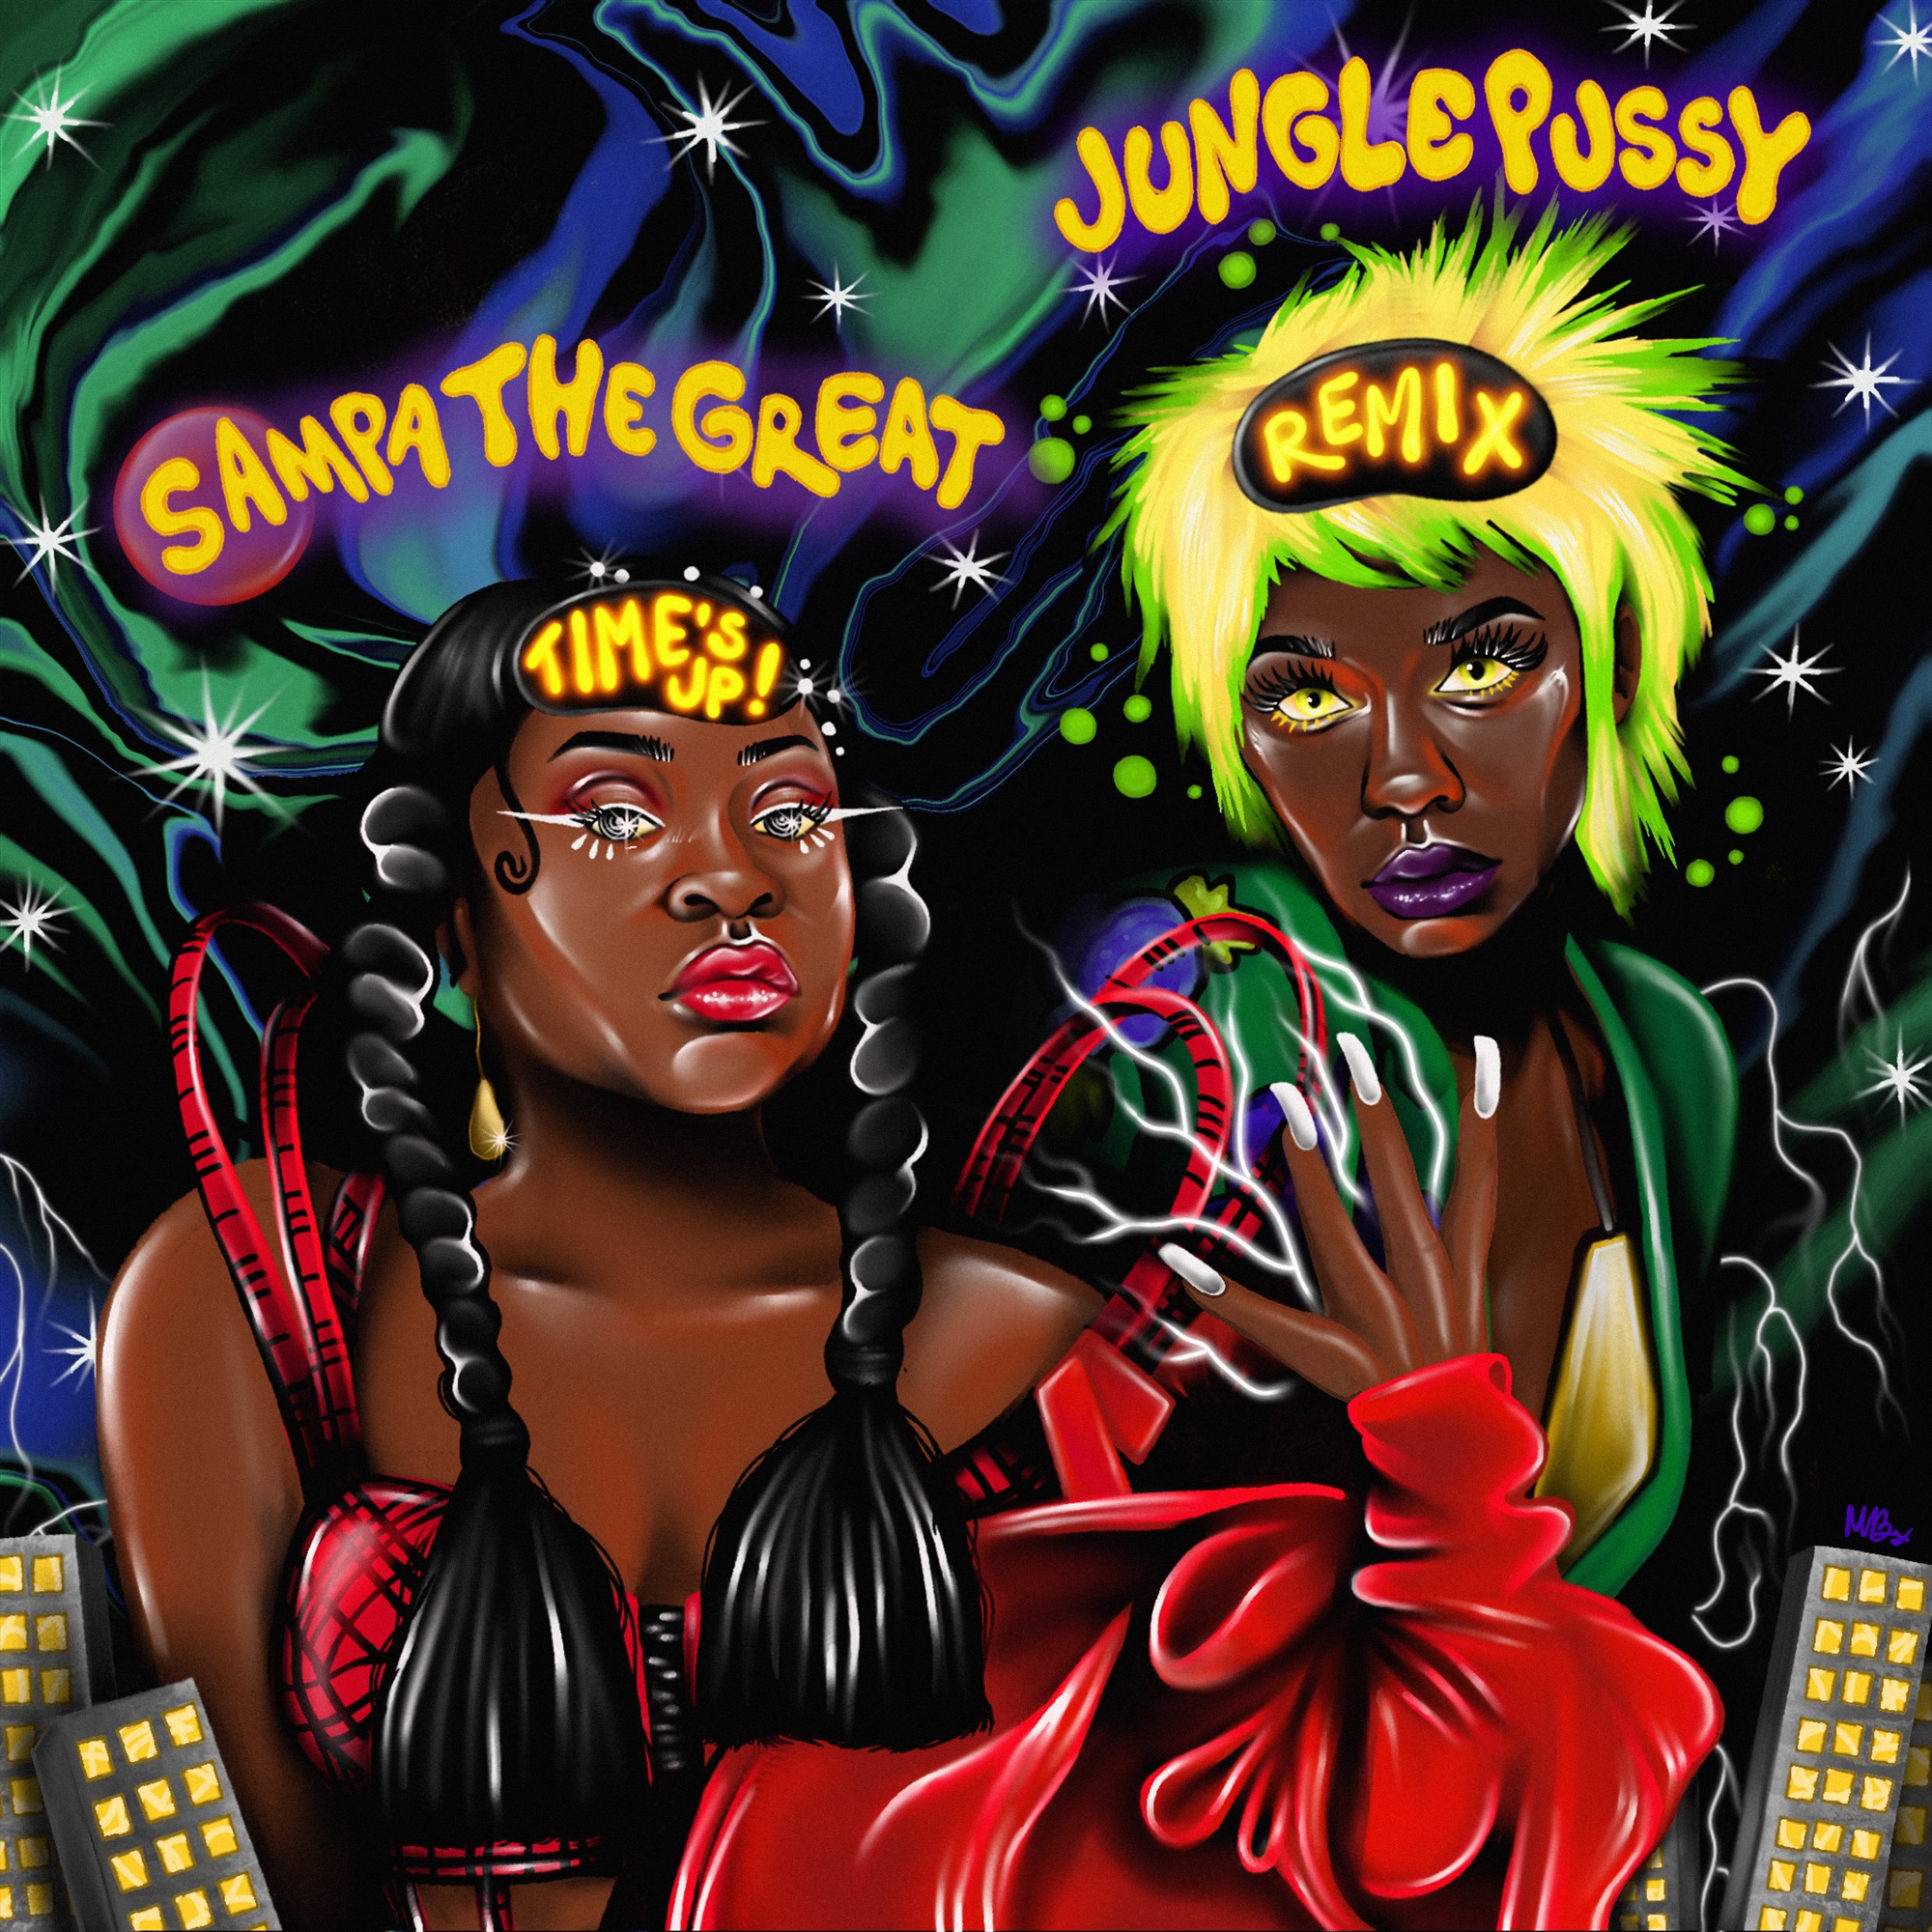 Sampa the Great - Time’s Up (Remix) [feat. Junglepussy] - Single